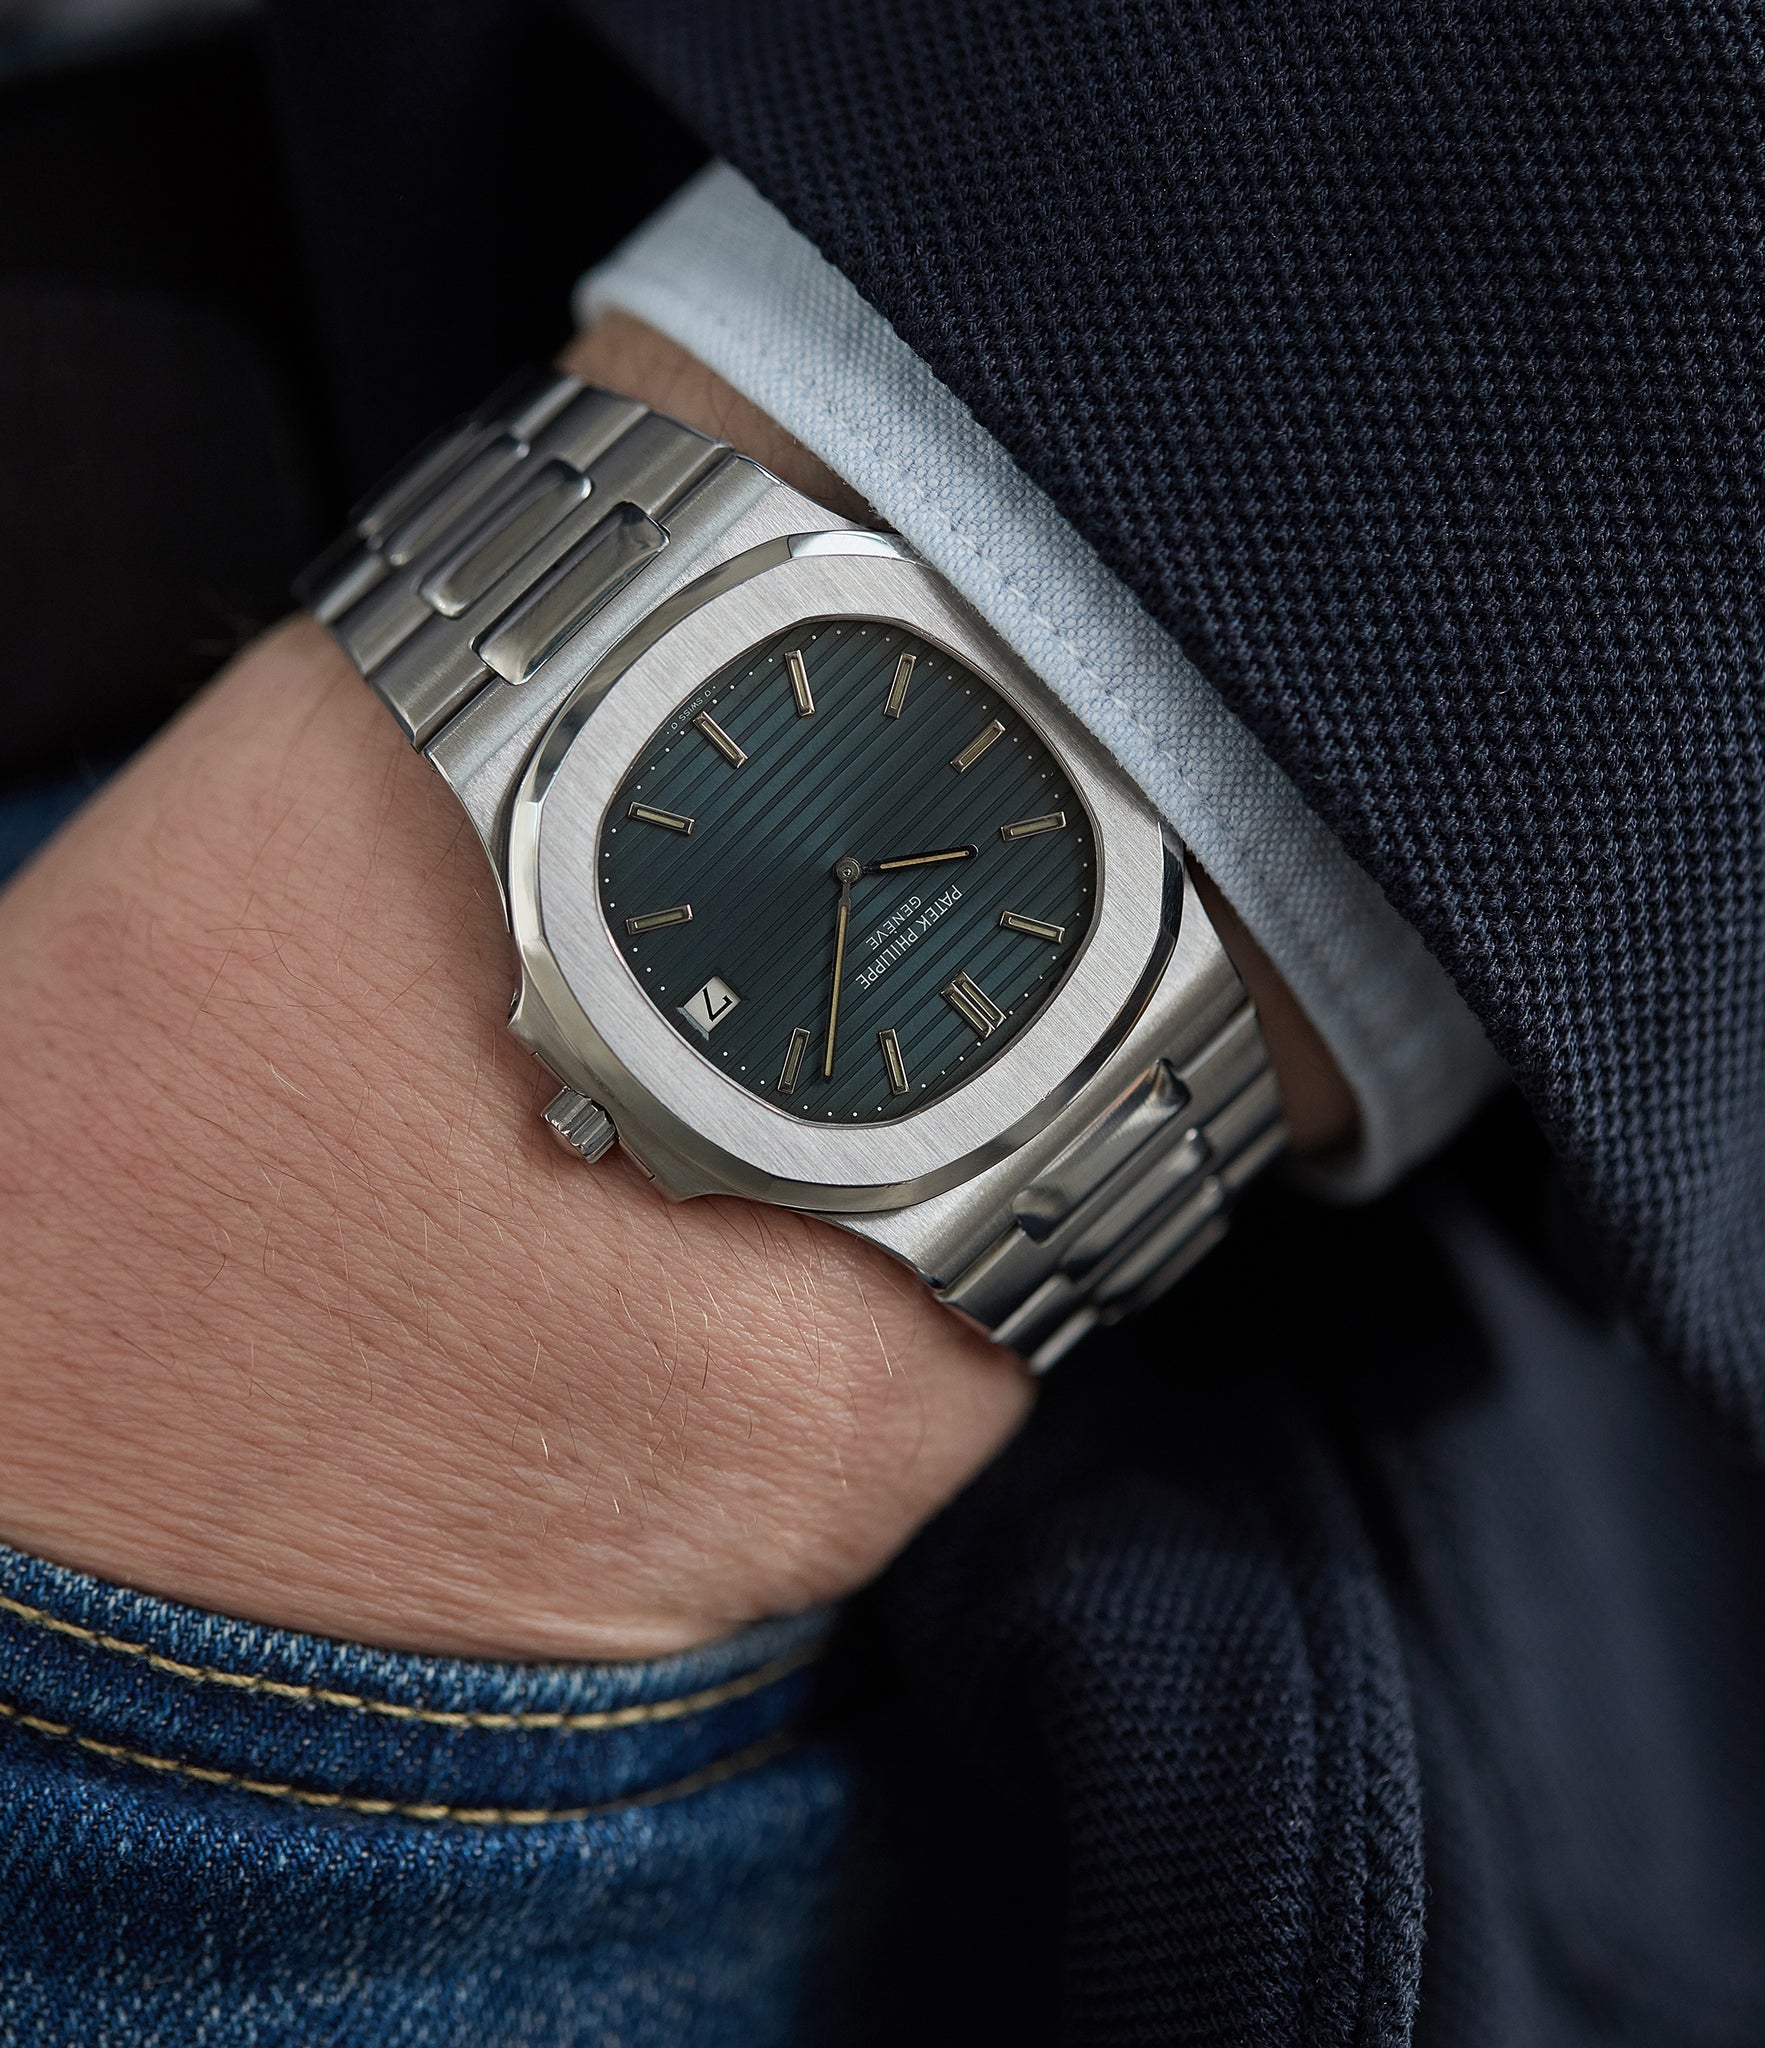 vintage Patek Philippe Nautilus 3700/001 full set watch for sale online at A Collected Man London UK specialist of rare watches